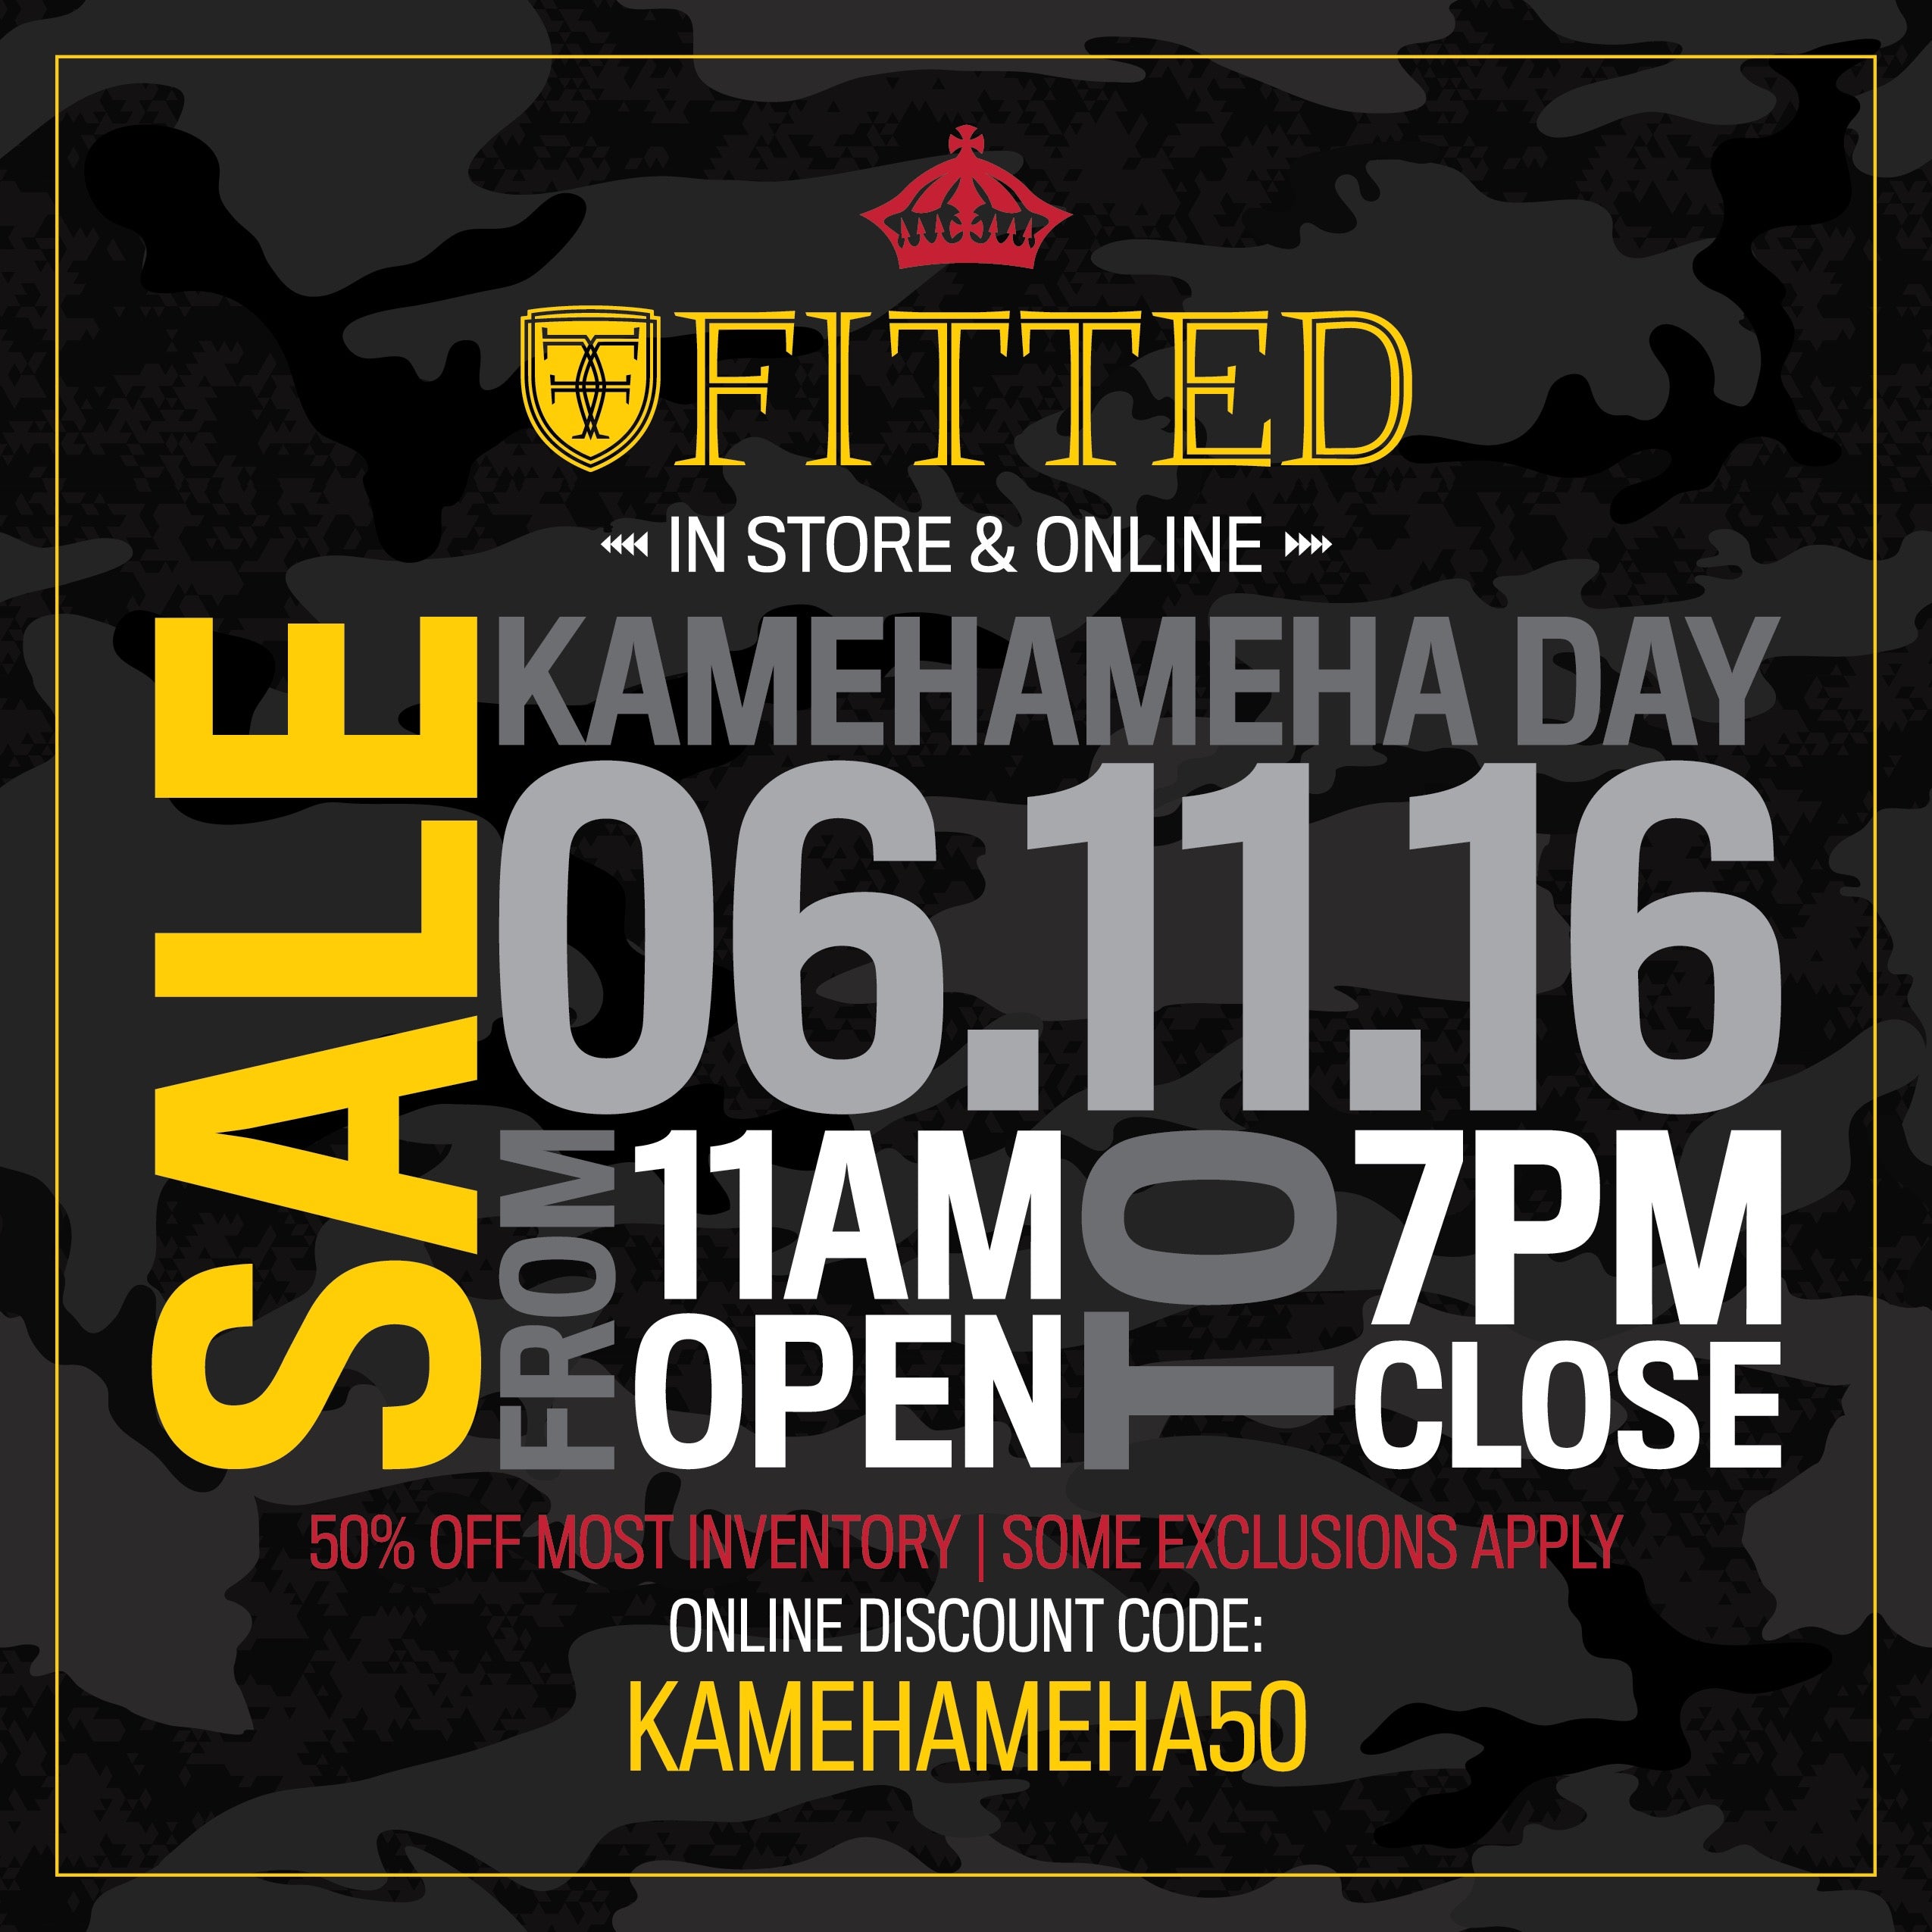 FITTED Hawaii - Aloha! The shop will be closing at 3pm today in observance  of Kamehameha Day. Mahalo! pc: @kekiahij005 #fittedhawaii #alohaserveddaily